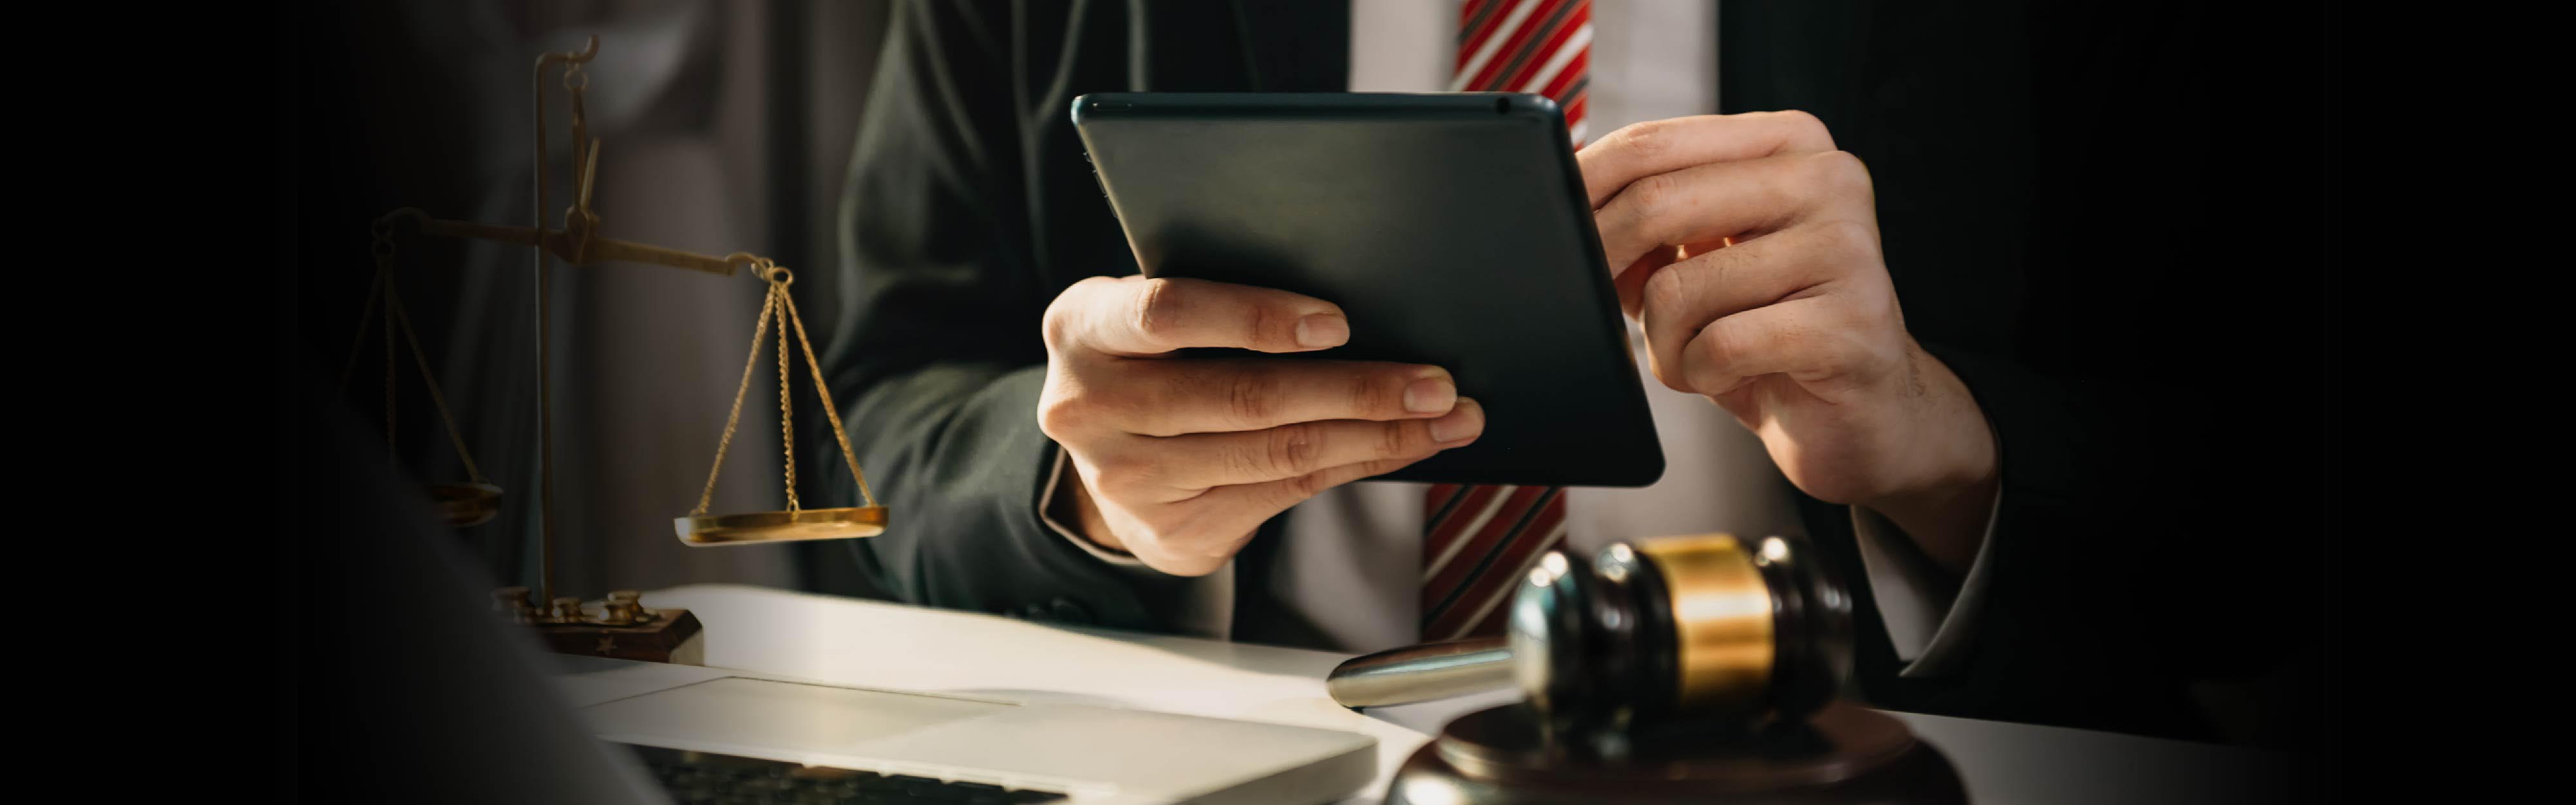 Ways e-Signatures can benefit law firms.